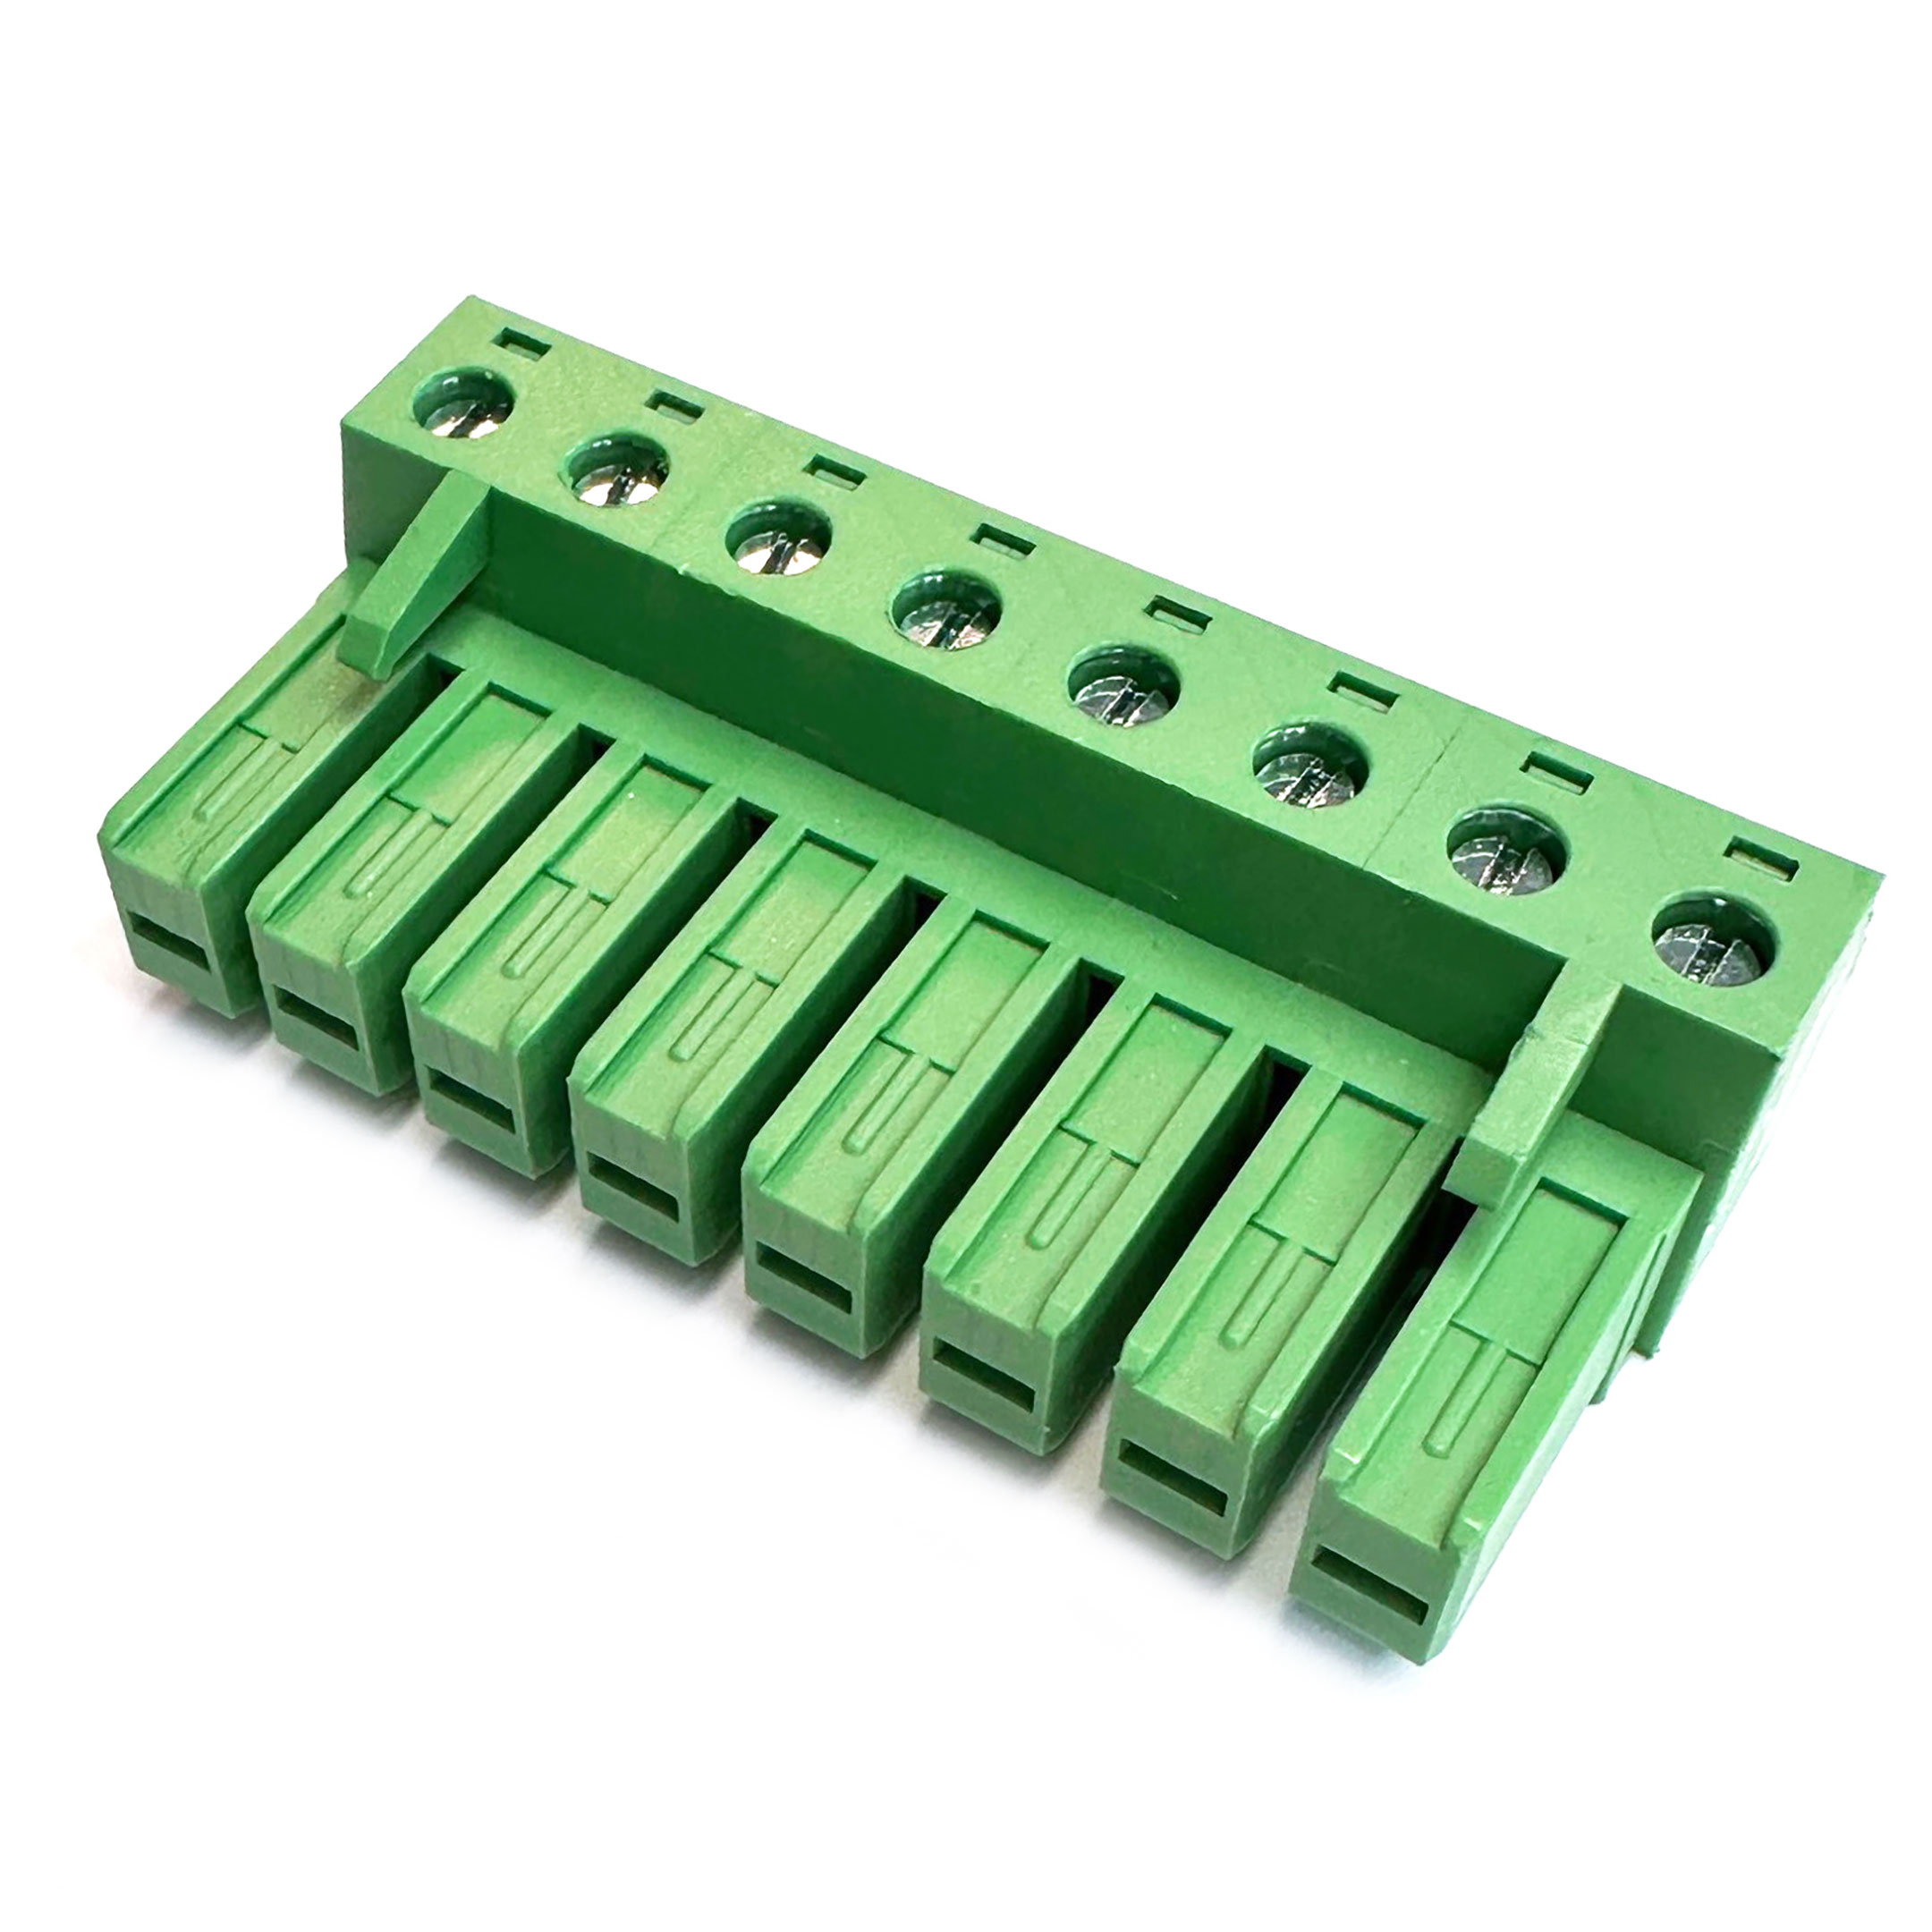 6614 Terminal Block Connector, Eight Pin, Male for 5811